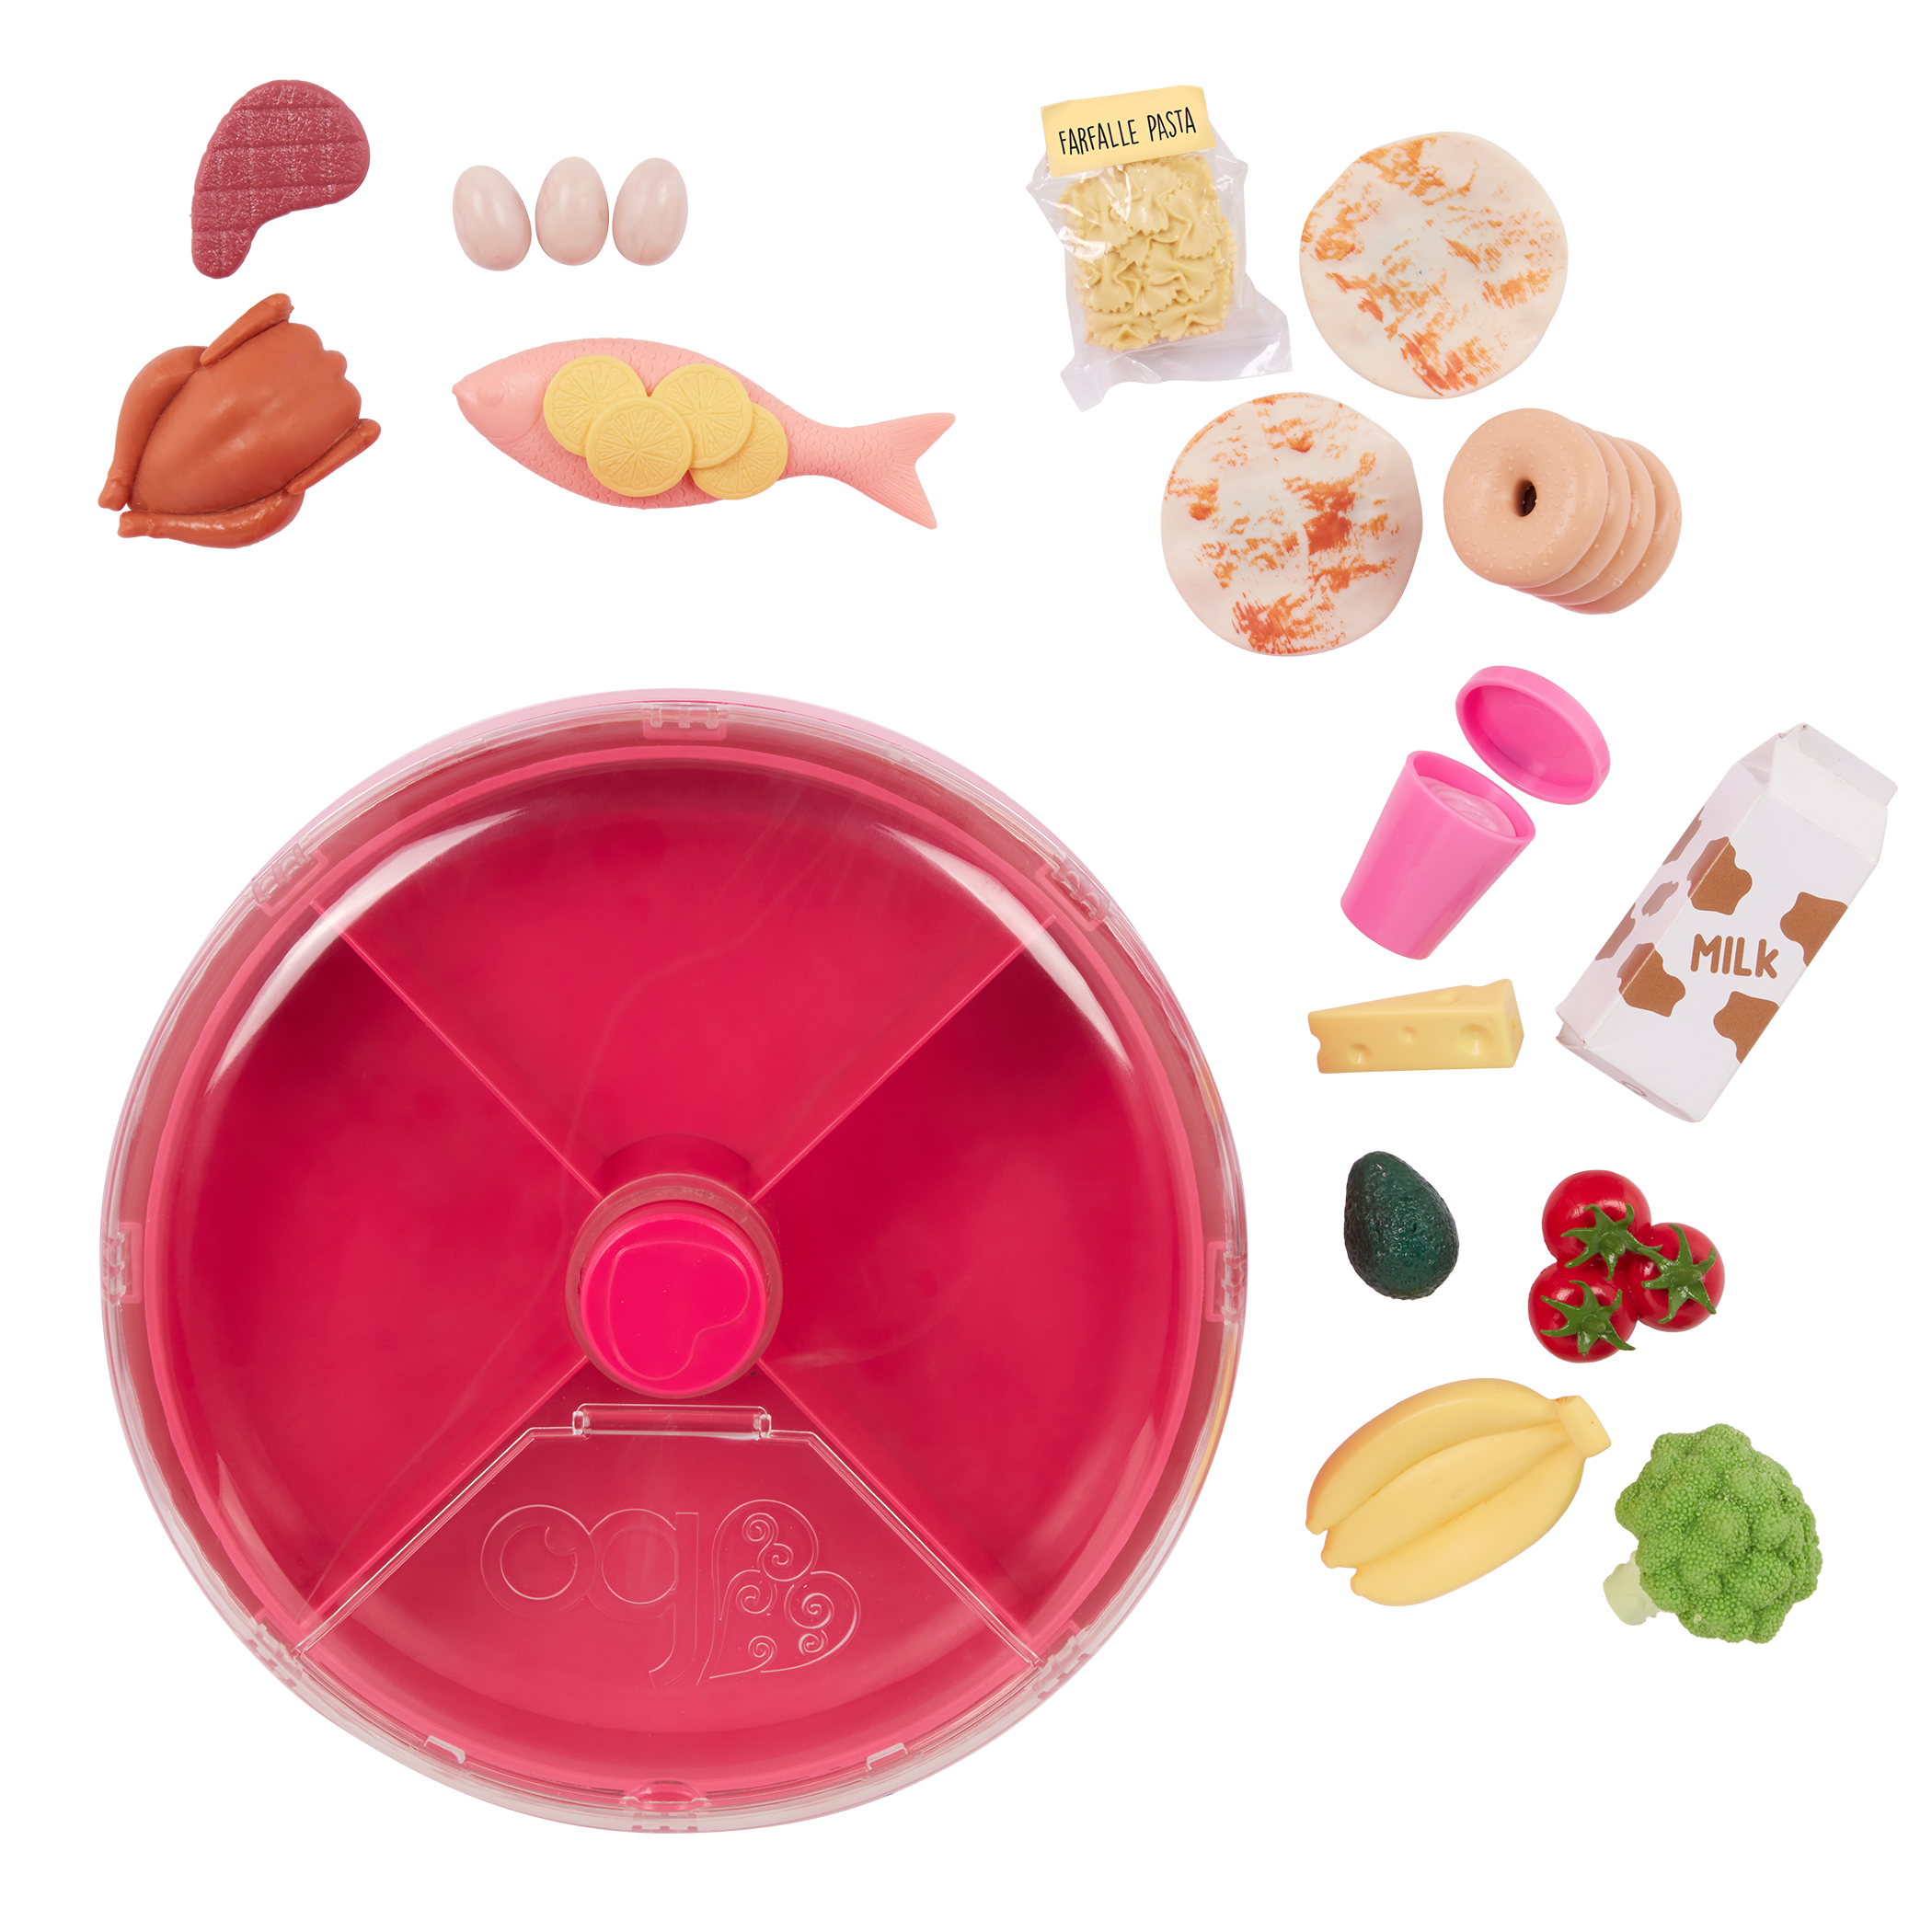 Our Generation Spin & Serve Play Food Set for 18-inch Dolls 